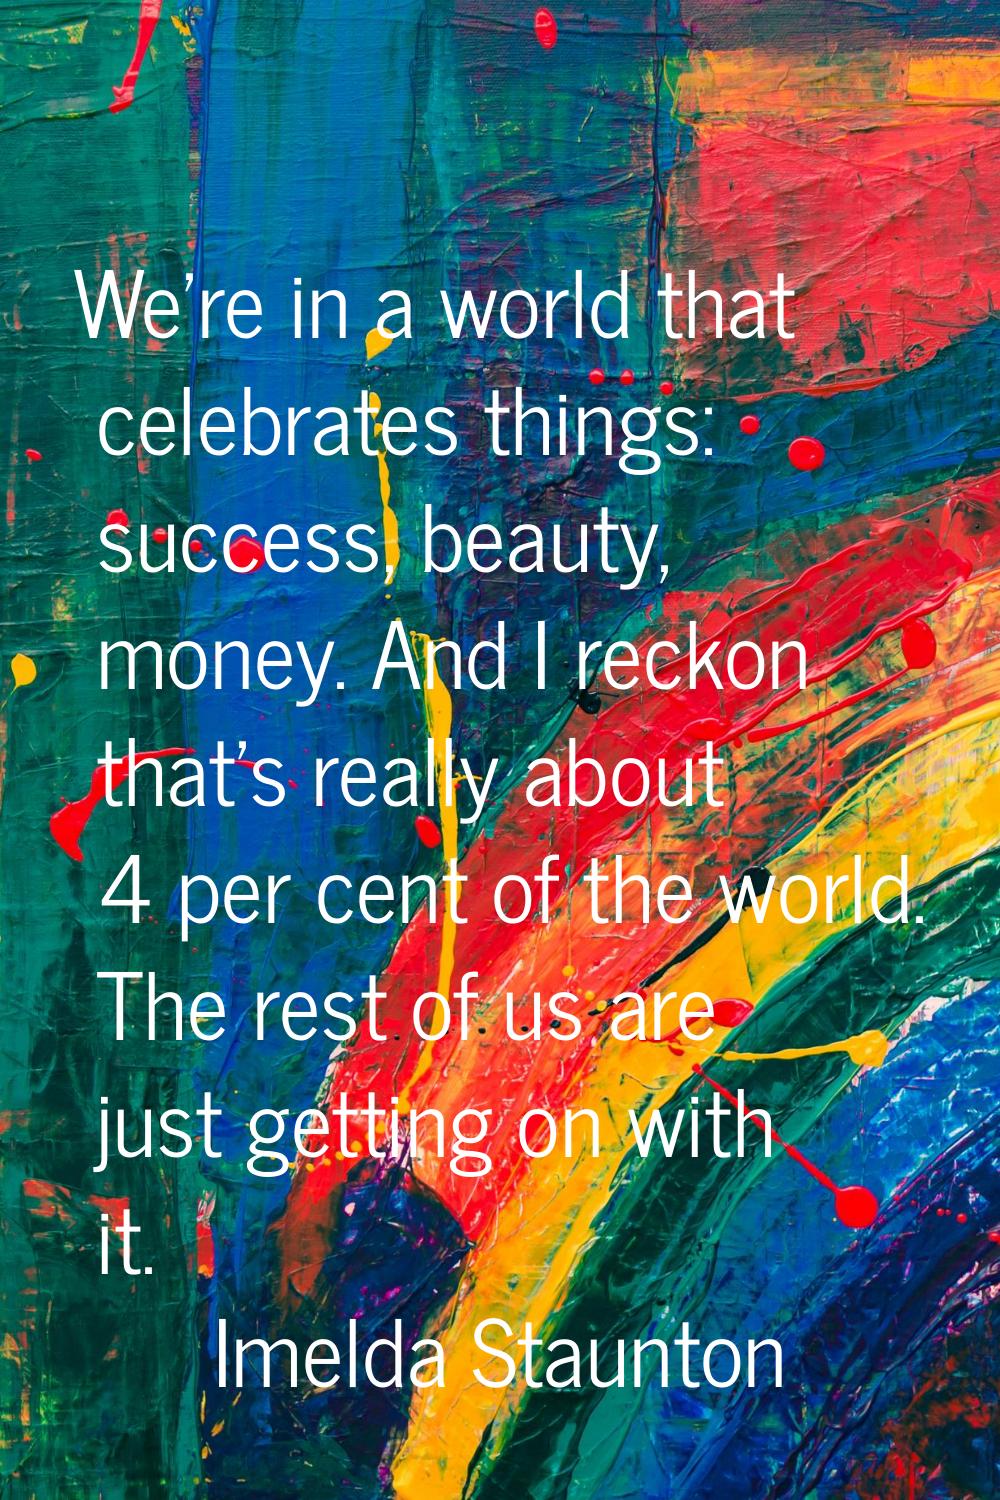 We're in a world that celebrates things: success, beauty, money. And I reckon that's really about 4